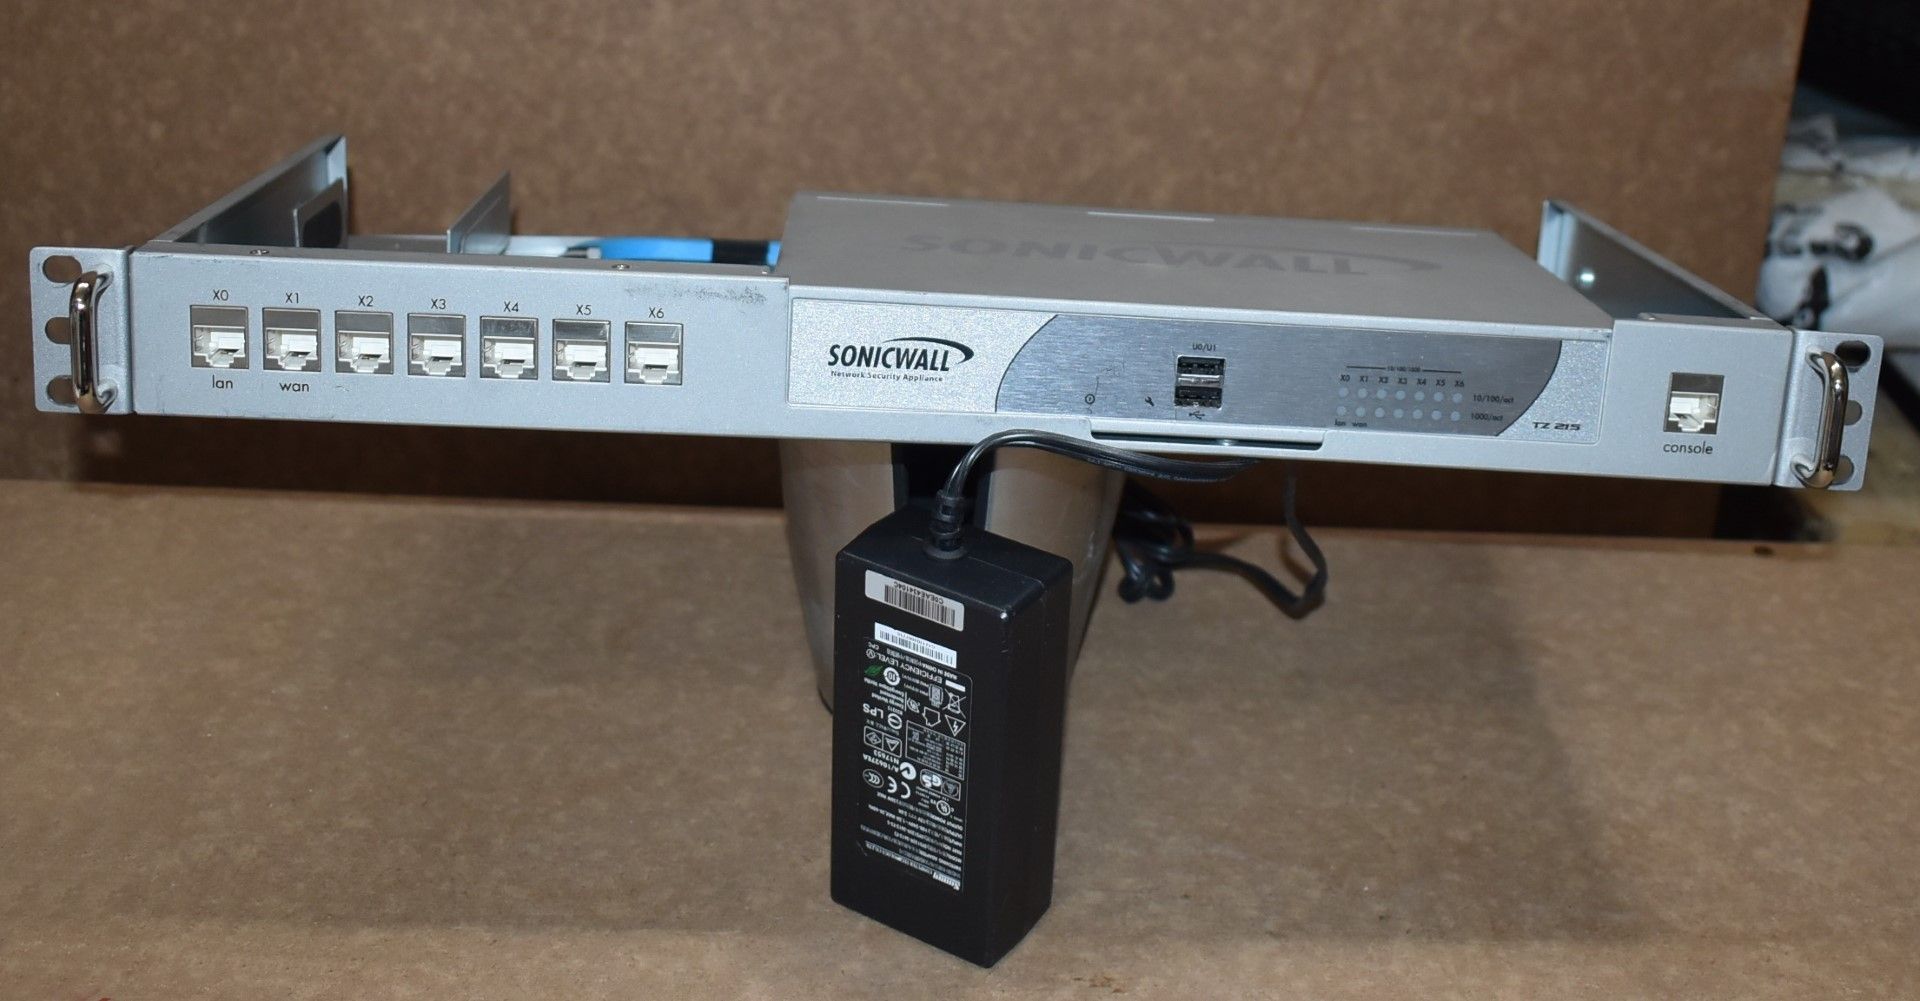 1 x Sonic Wall TZ215 UTM Firewall For Small Offices With Rackmount Kit and PSU - Approx RRP £480 - - Image 3 of 11